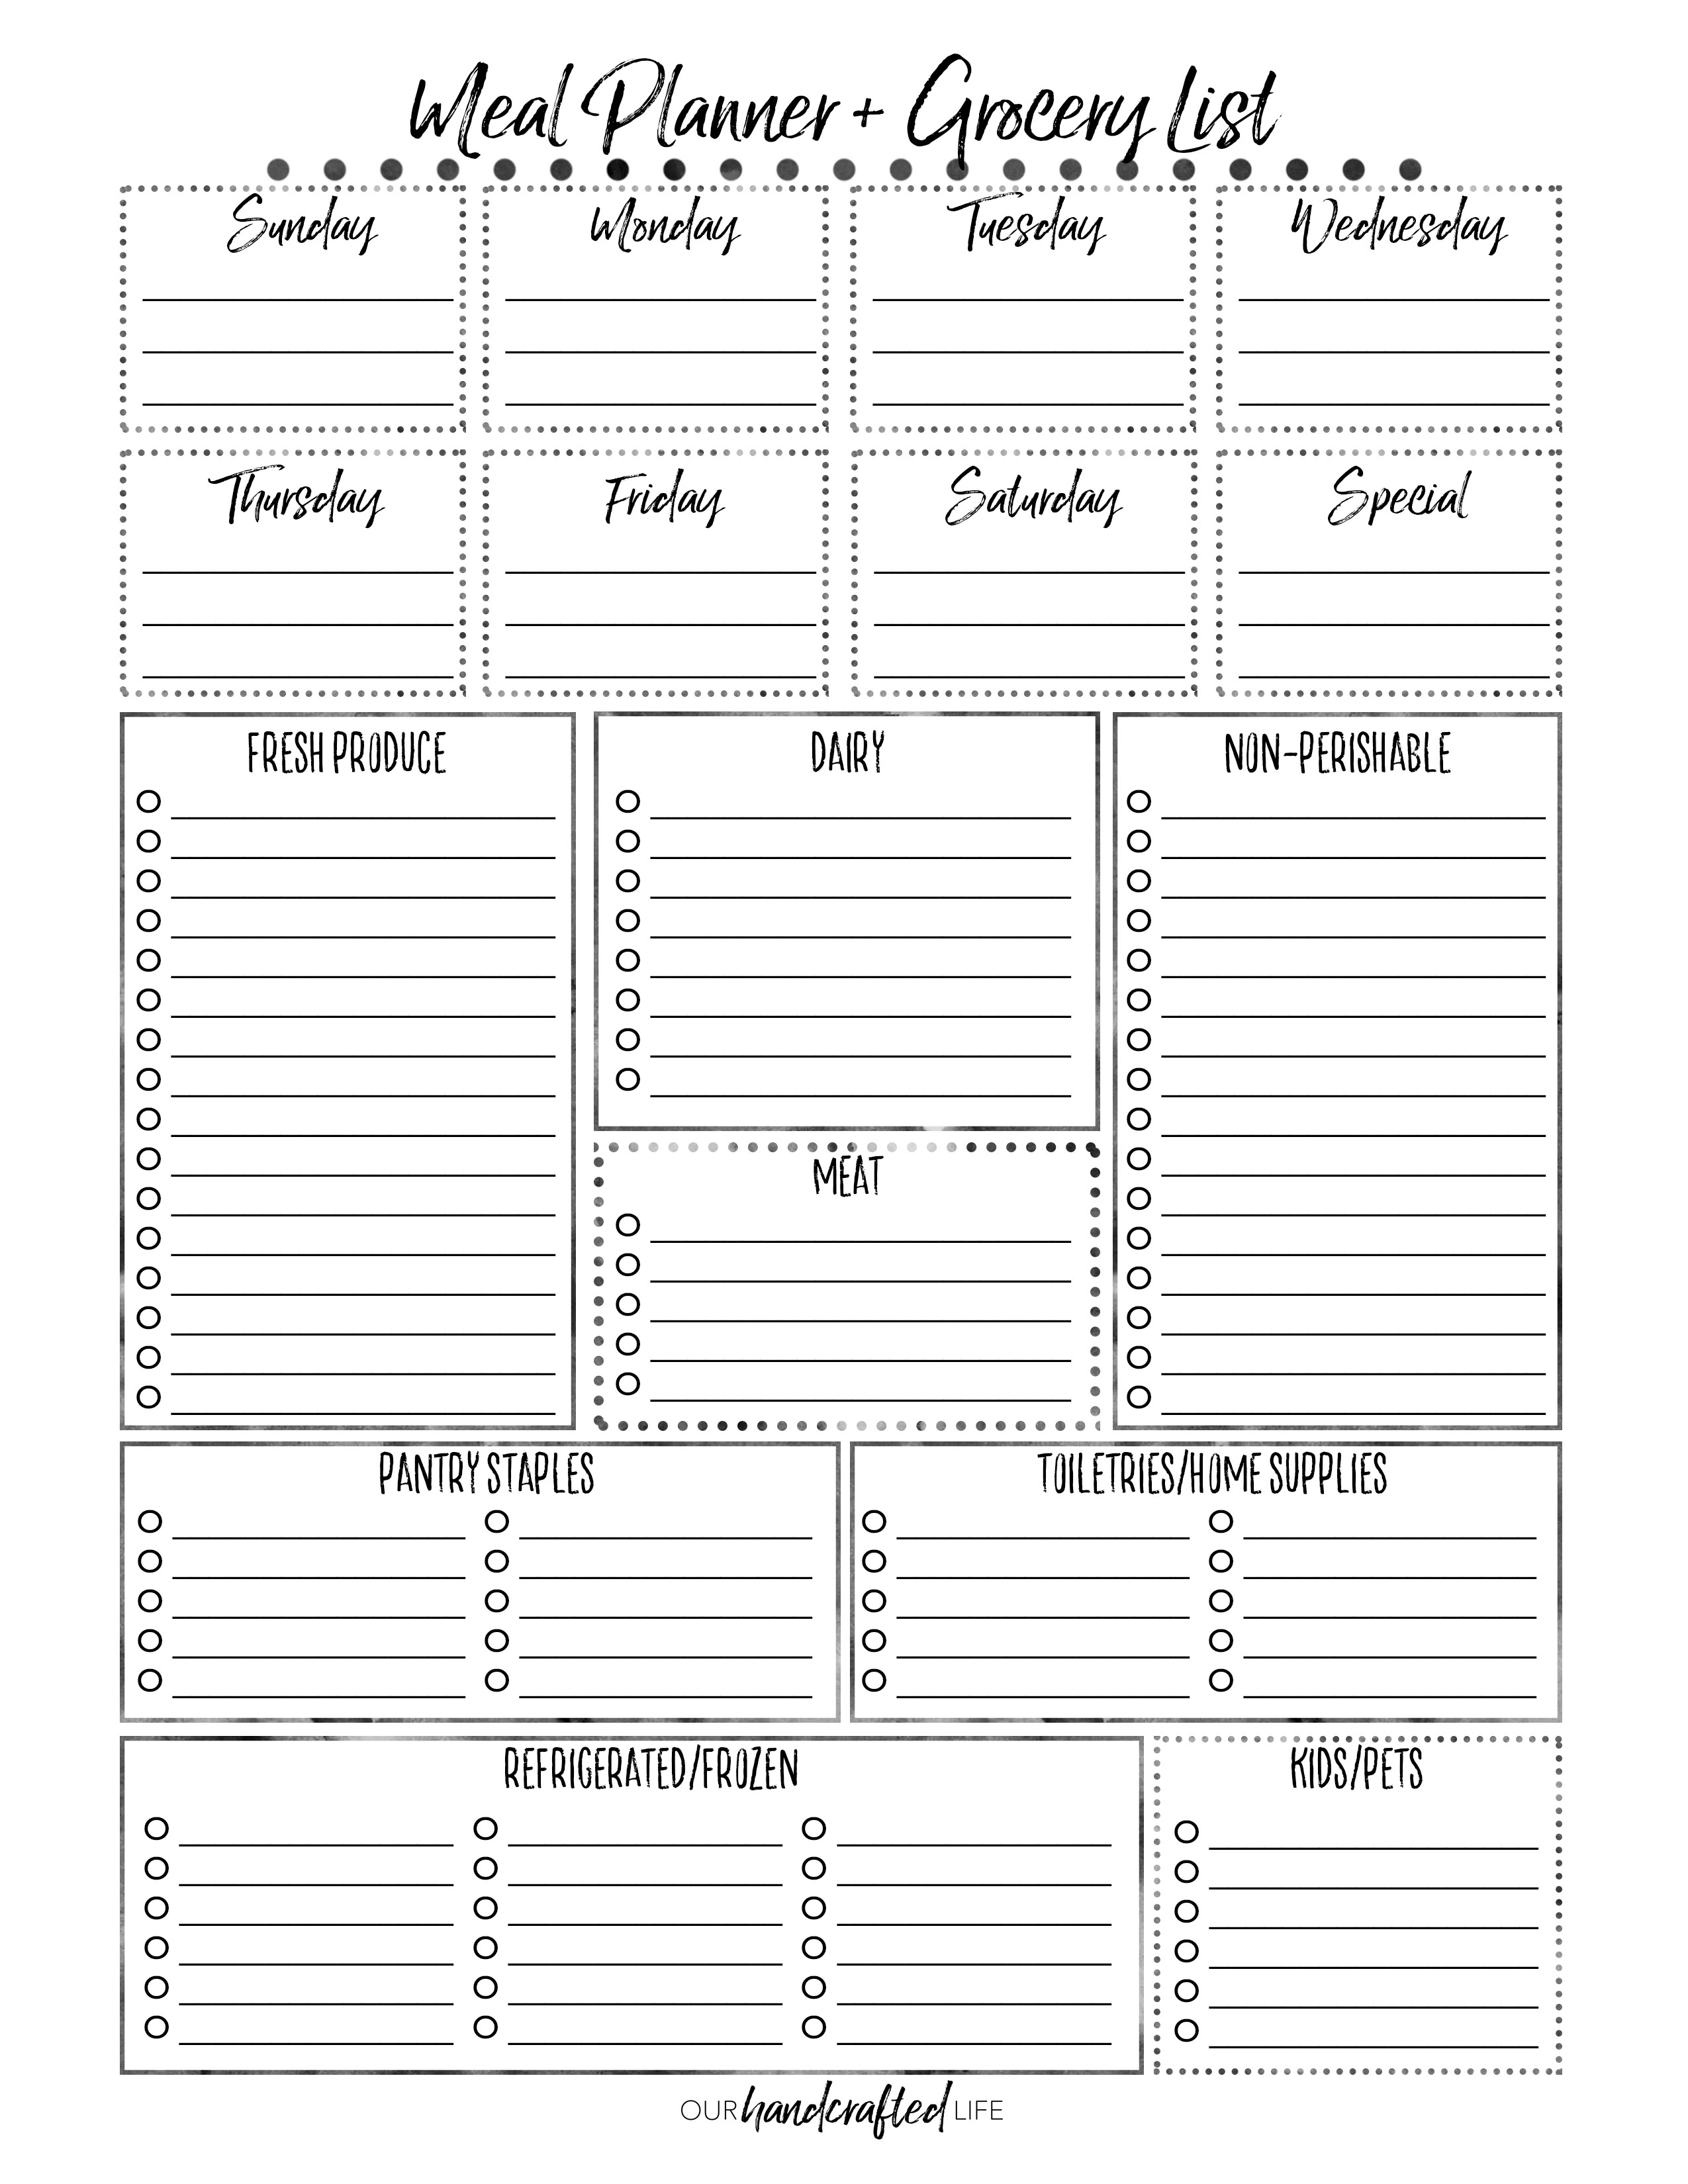 The Most Practical Meal Planner Ever - Our Handcrafted Life - Free Printable Menu Planner